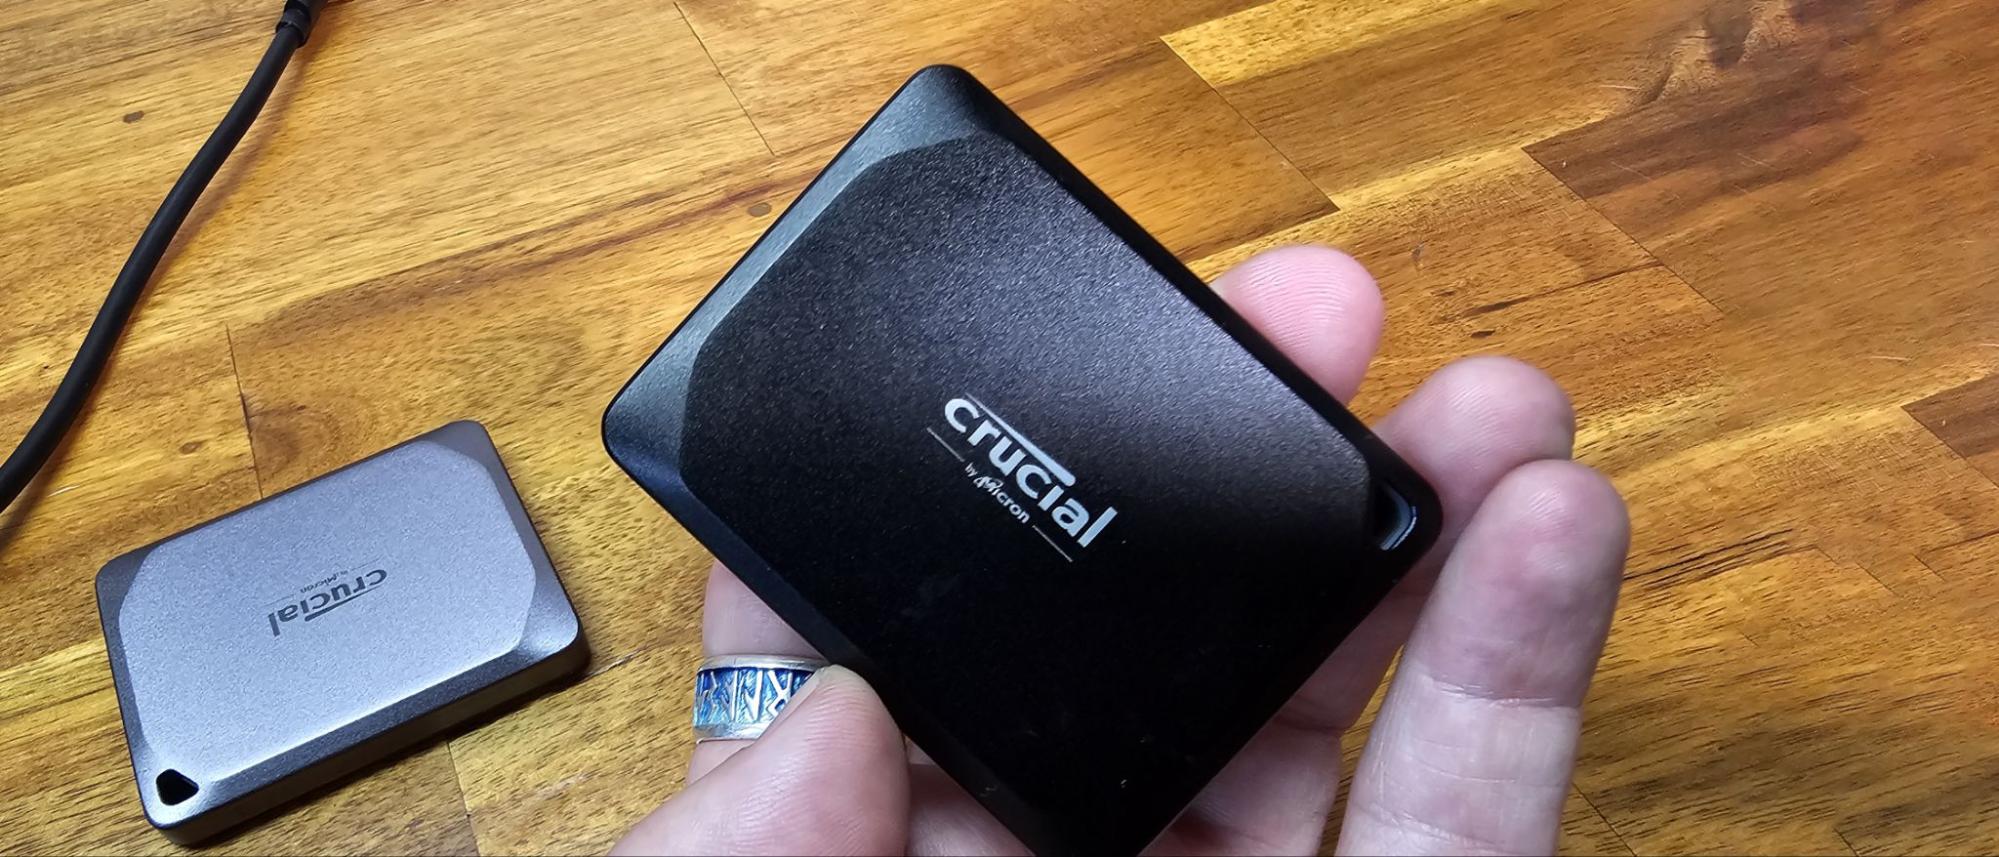 Crucial X9 Pro 4TB Portable SSD Review - Incredible Capacity in a